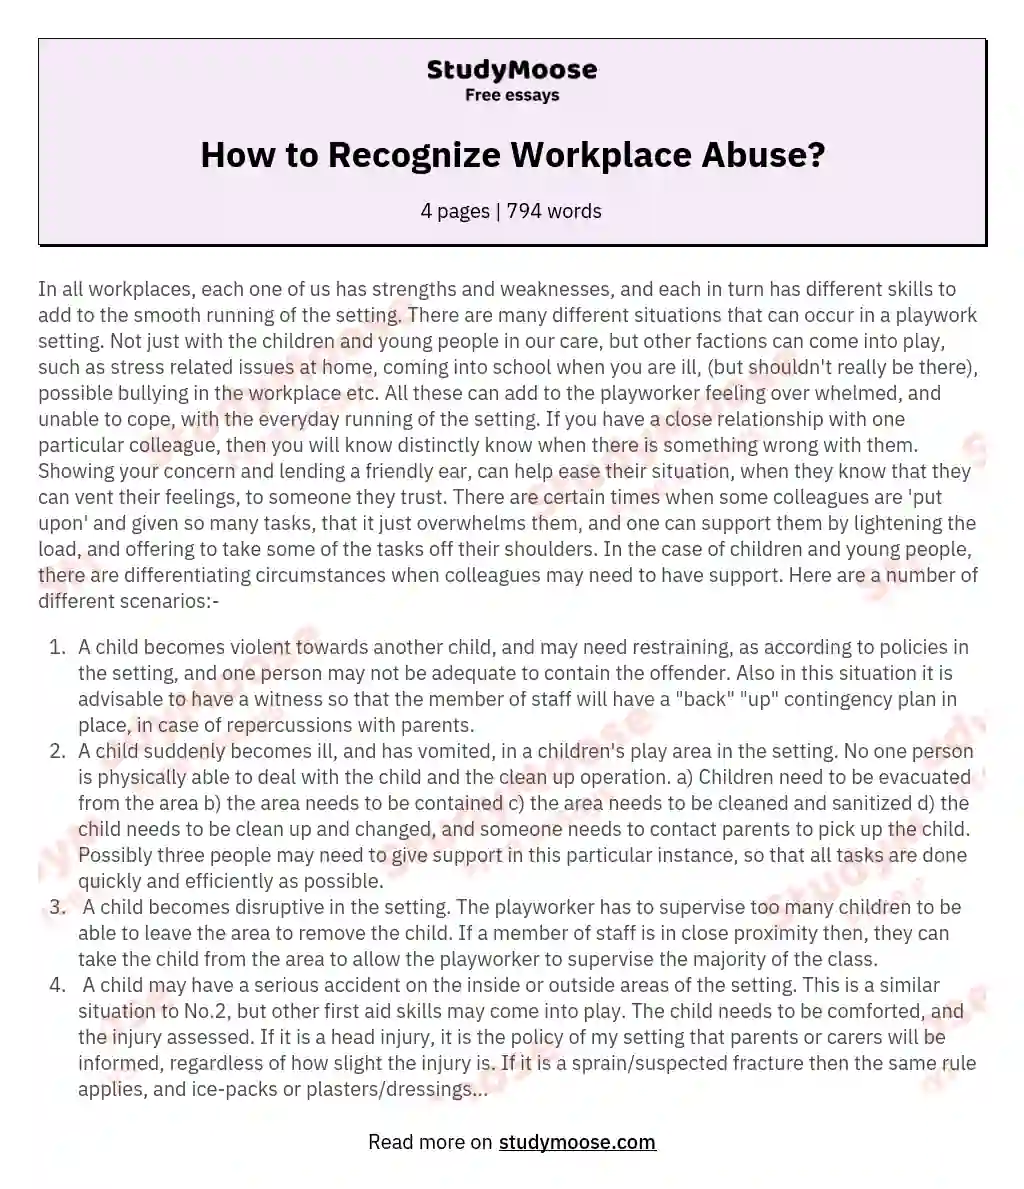 How to Recognize Workplace Abuse? essay